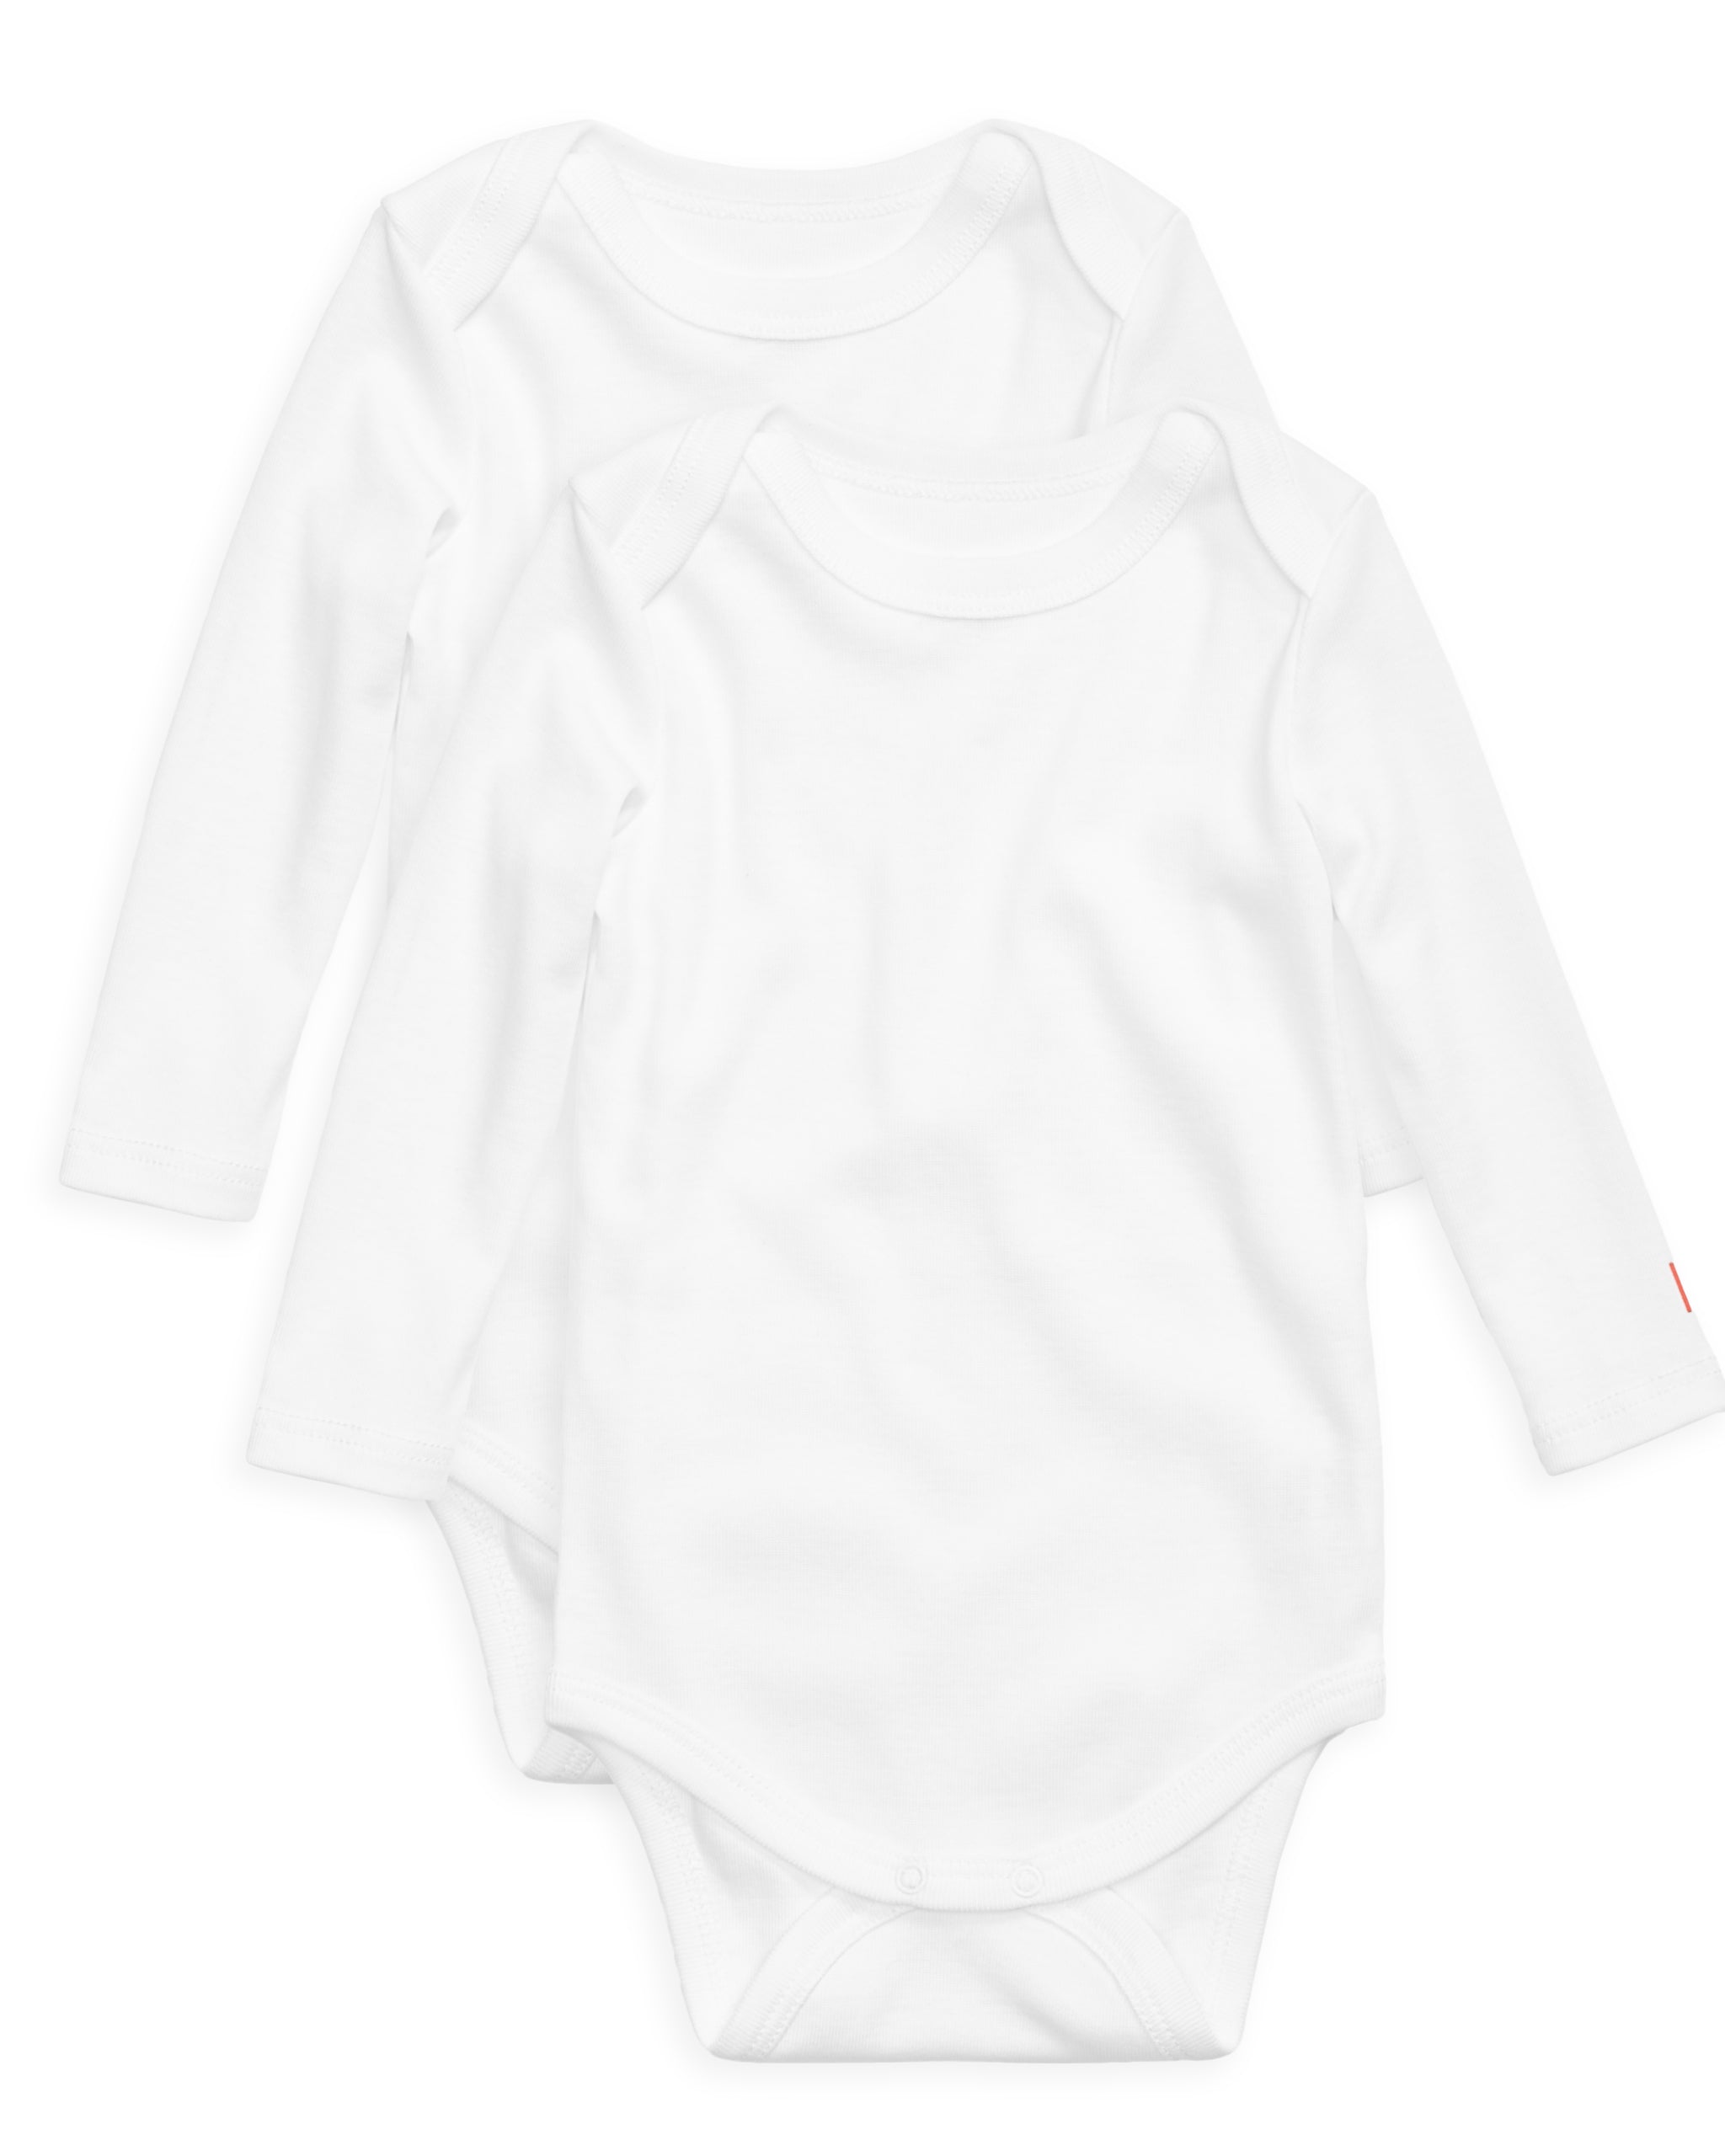 The Daily Long Sleeve Onesie 2 Pack #color_White